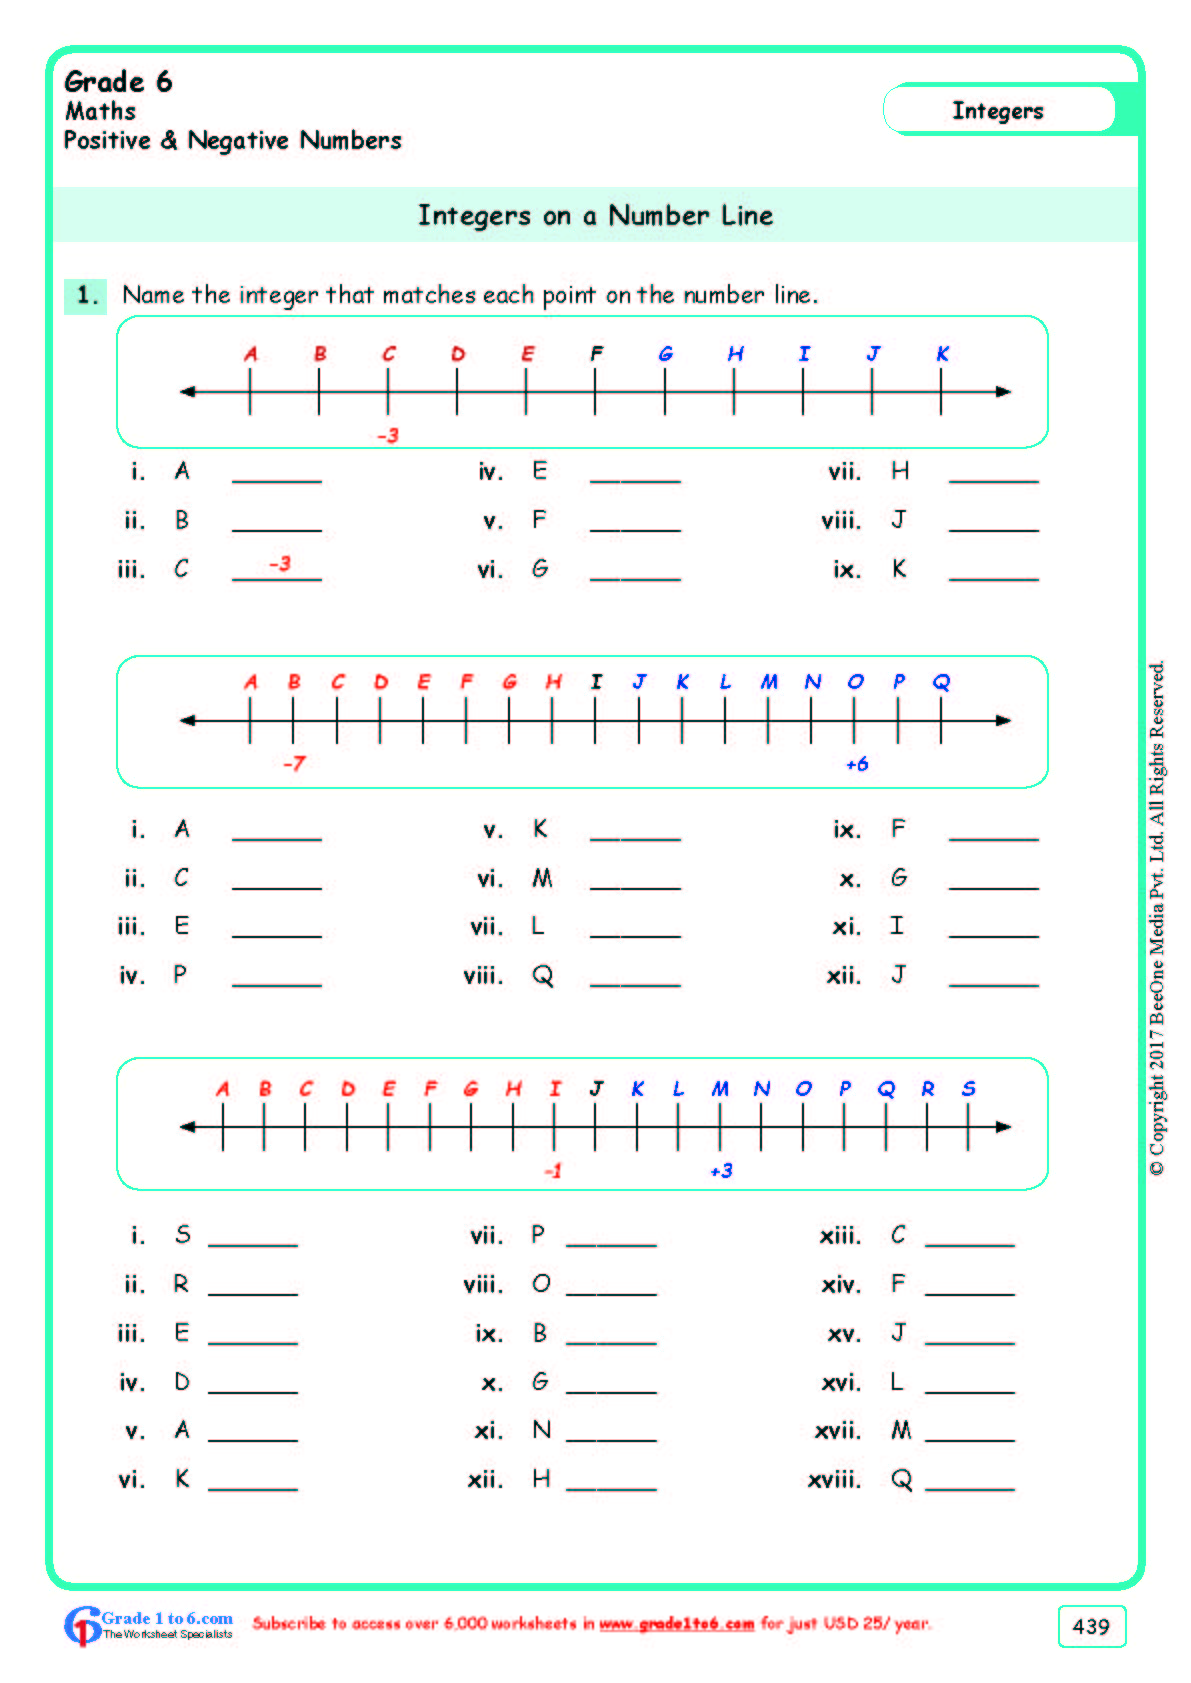 free-math-worksheets-for-grade-6-class-6-ib-cbse-icse-k12-and-all